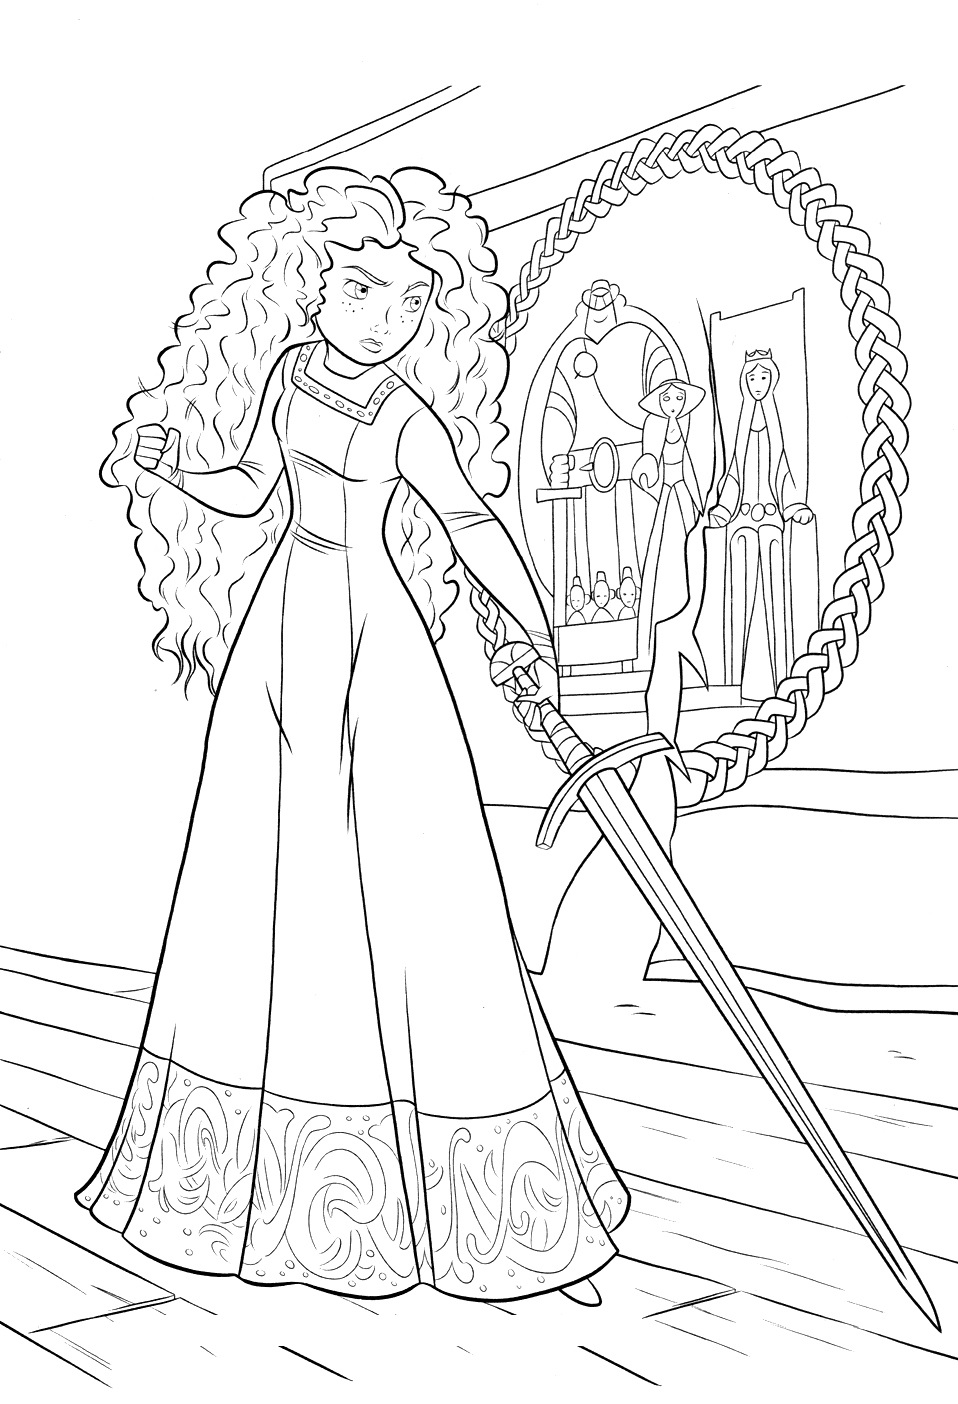 Brave coloring pages princess merida coloring pages for kids ...